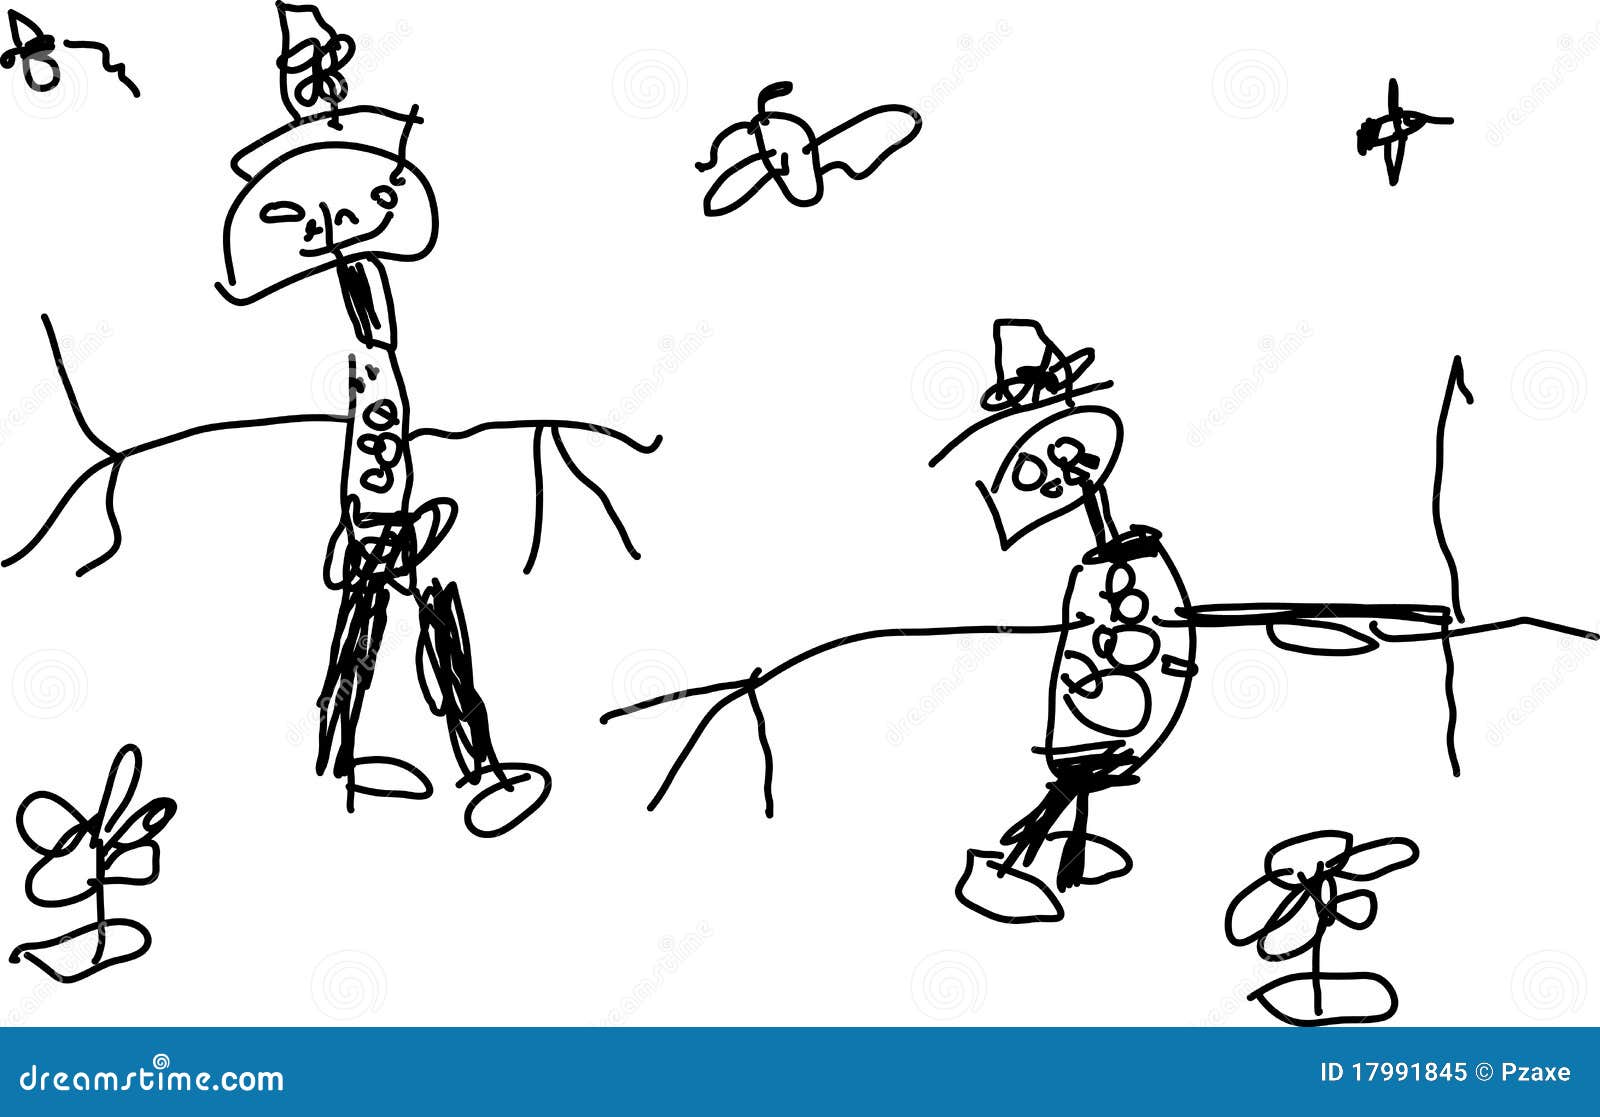 child-s-drawing-two-funny-people-17991845.jpg